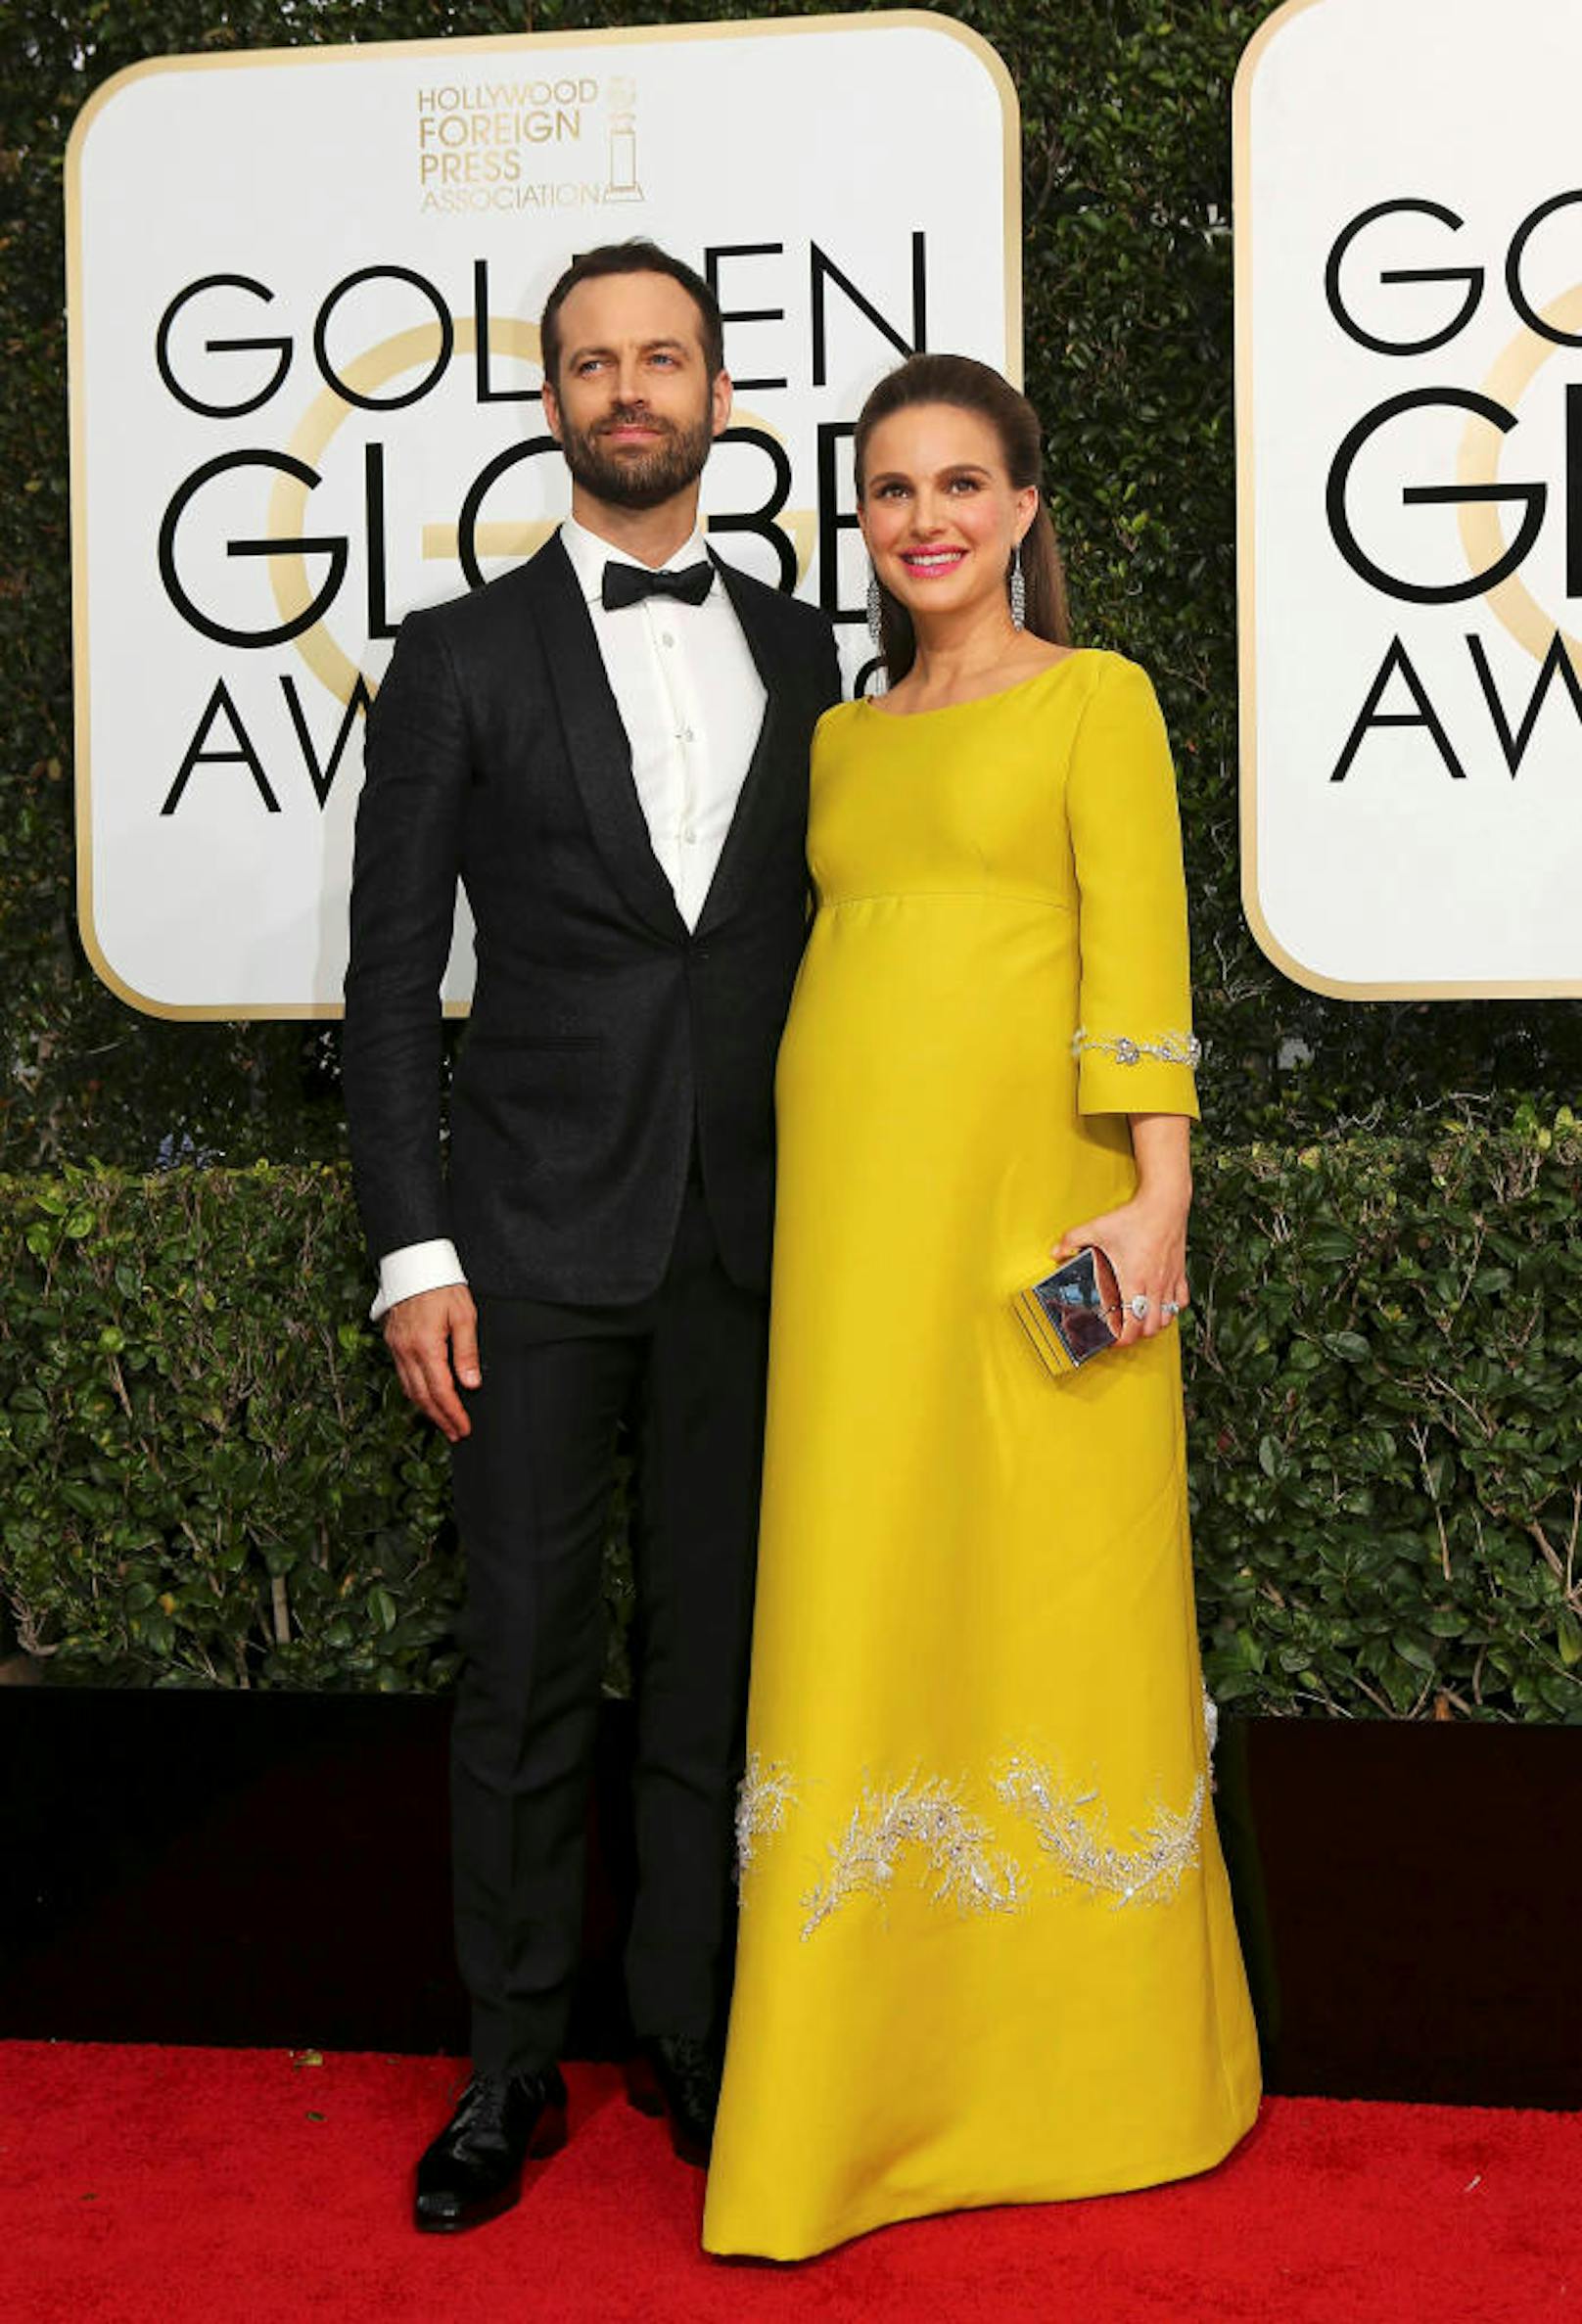 Actress Natalie Portman and her husband Benjamin Millepied arrive at the 74th Annual Golden Globe Awards in Beverly Hills, California, U.S., January 8, 2017.   REUTERS/Mike Blake     TPX IMAGES OF THE DAY - RTX2Y0N3